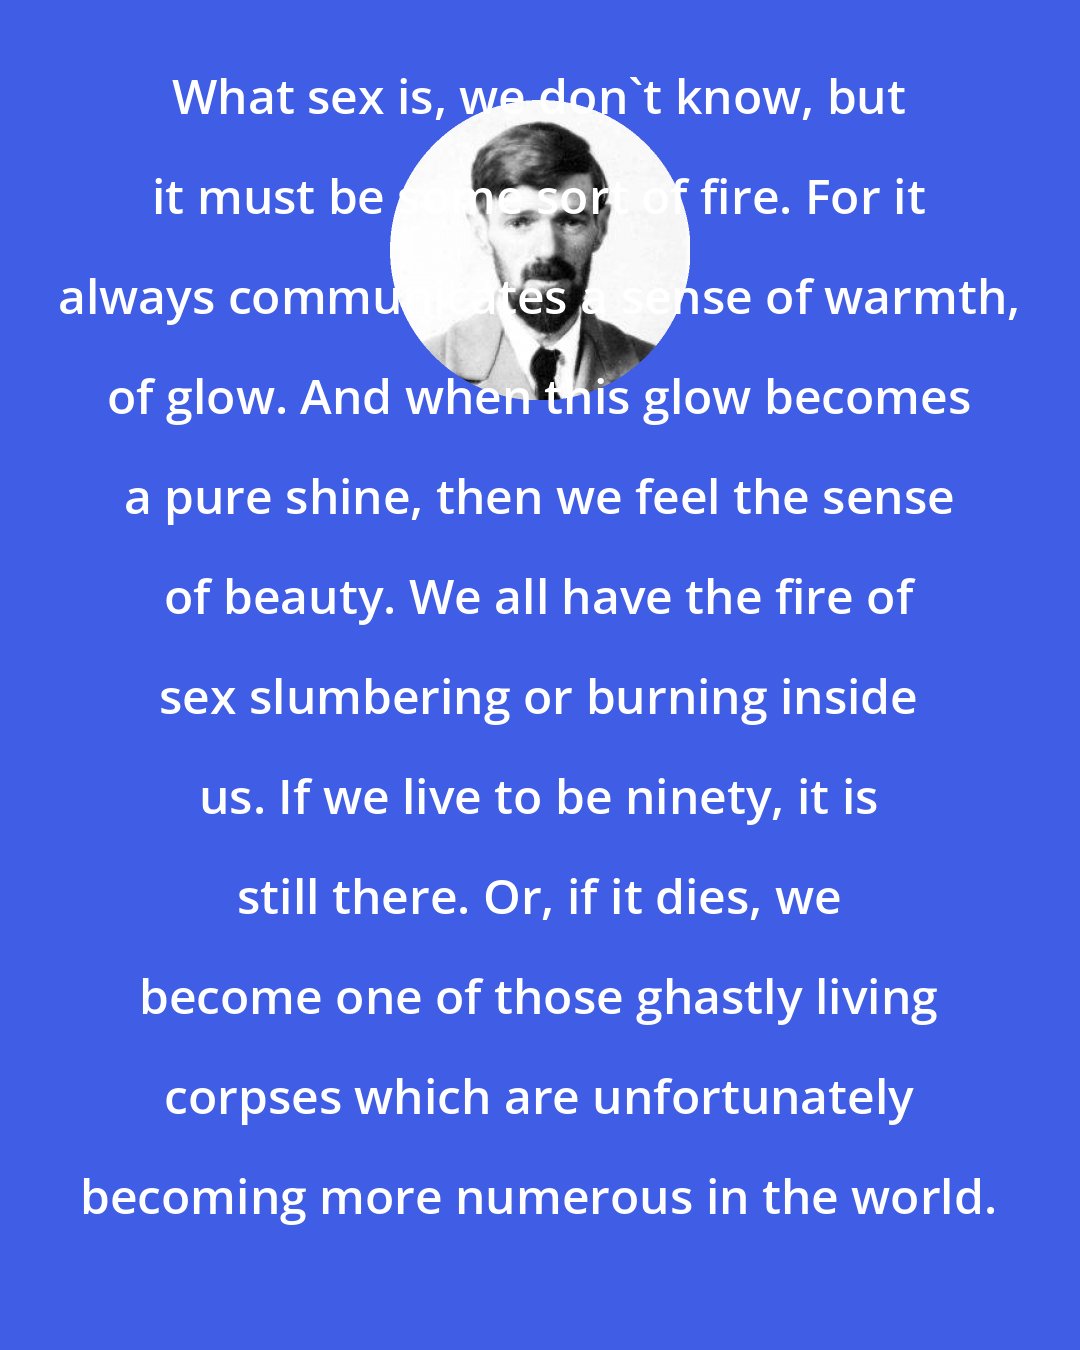 D. H. Lawrence: What sex is, we don't know, but it must be some sort of fire. For it always communicates a sense of warmth, of glow. And when this glow becomes a pure shine, then we feel the sense of beauty. We all have the fire of sex slumbering or burning inside us. If we live to be ninety, it is still there. Or, if it dies, we become one of those ghastly living corpses which are unfortunately becoming more numerous in the world.